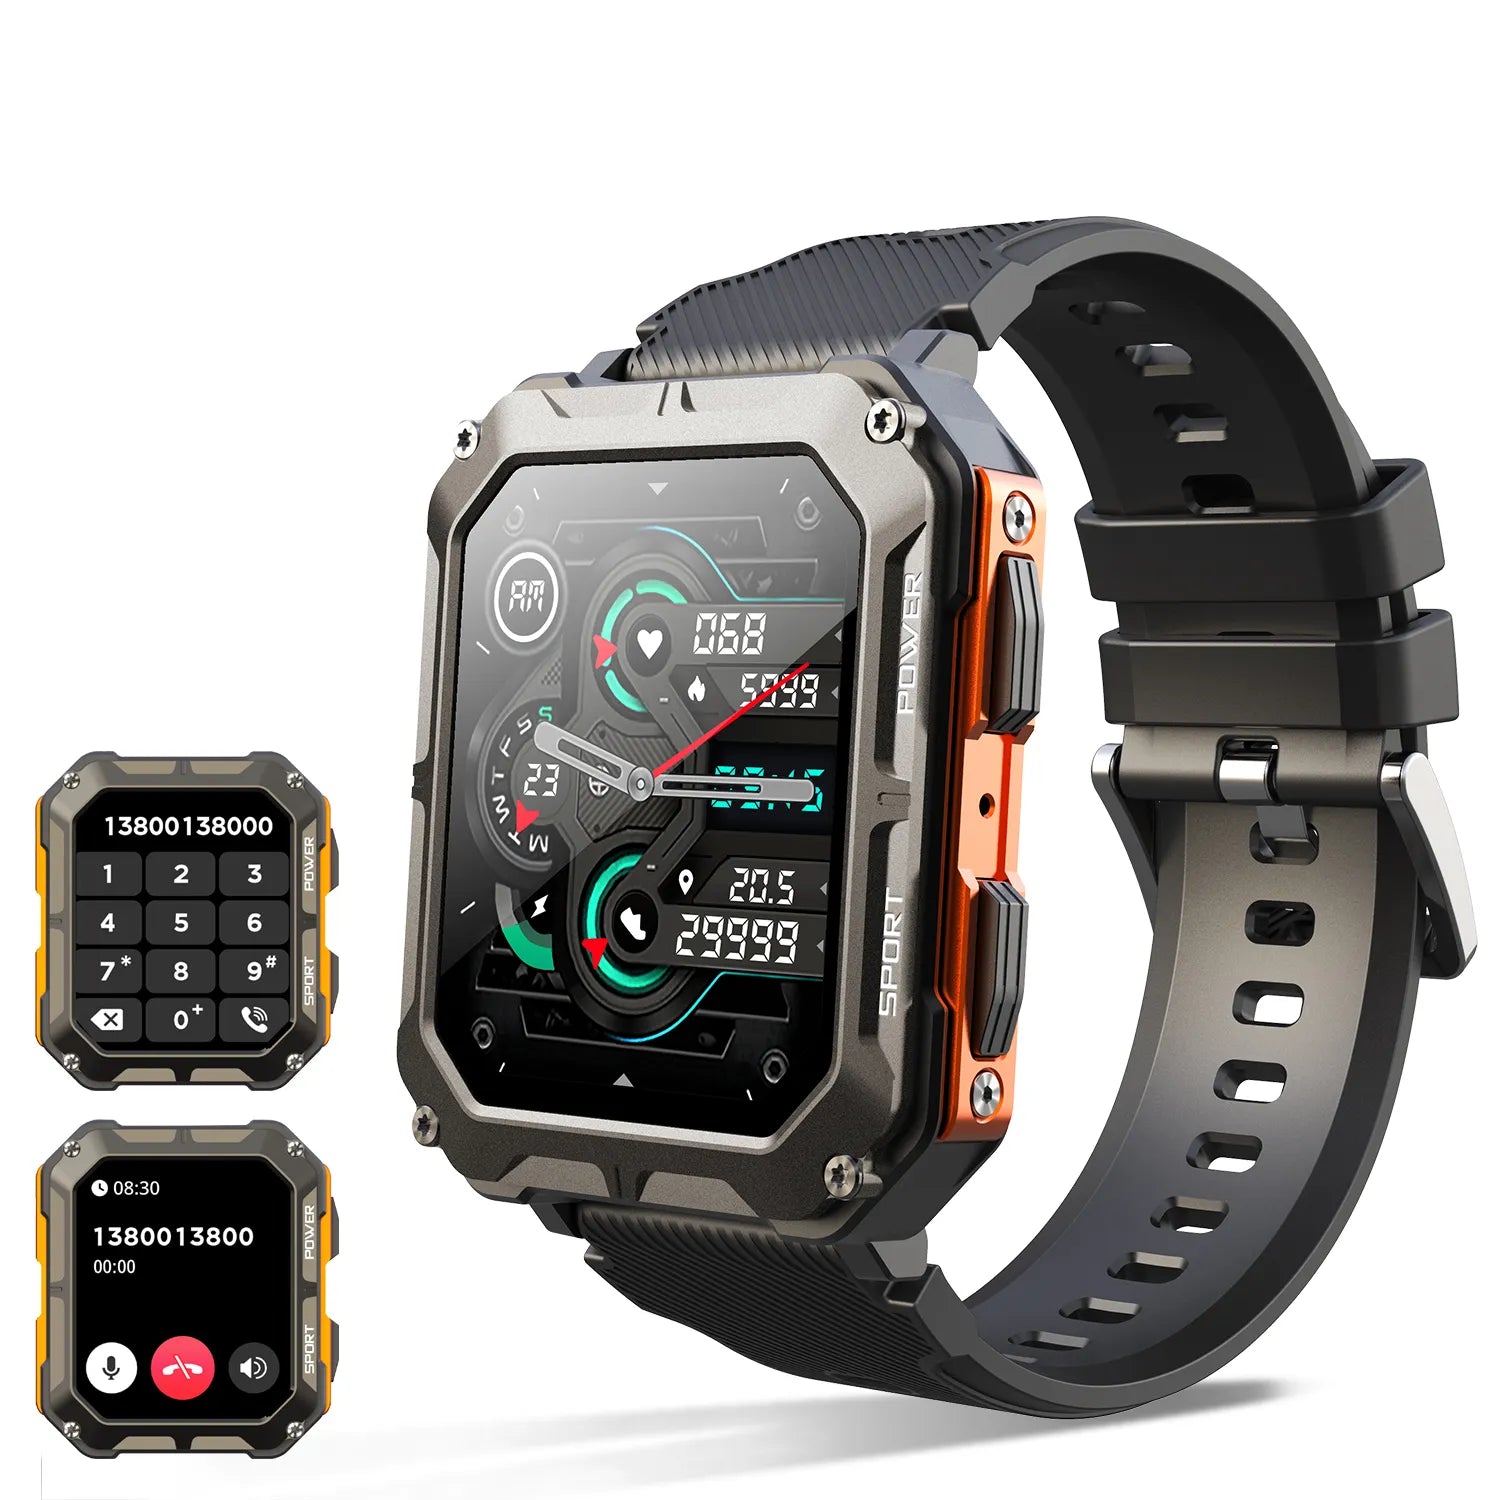 C20 Pro Smart Watch Voice Assistant BT Wireless Call Business Outdoor Sports IP68 Waterproof Wristwatch For Android iOS